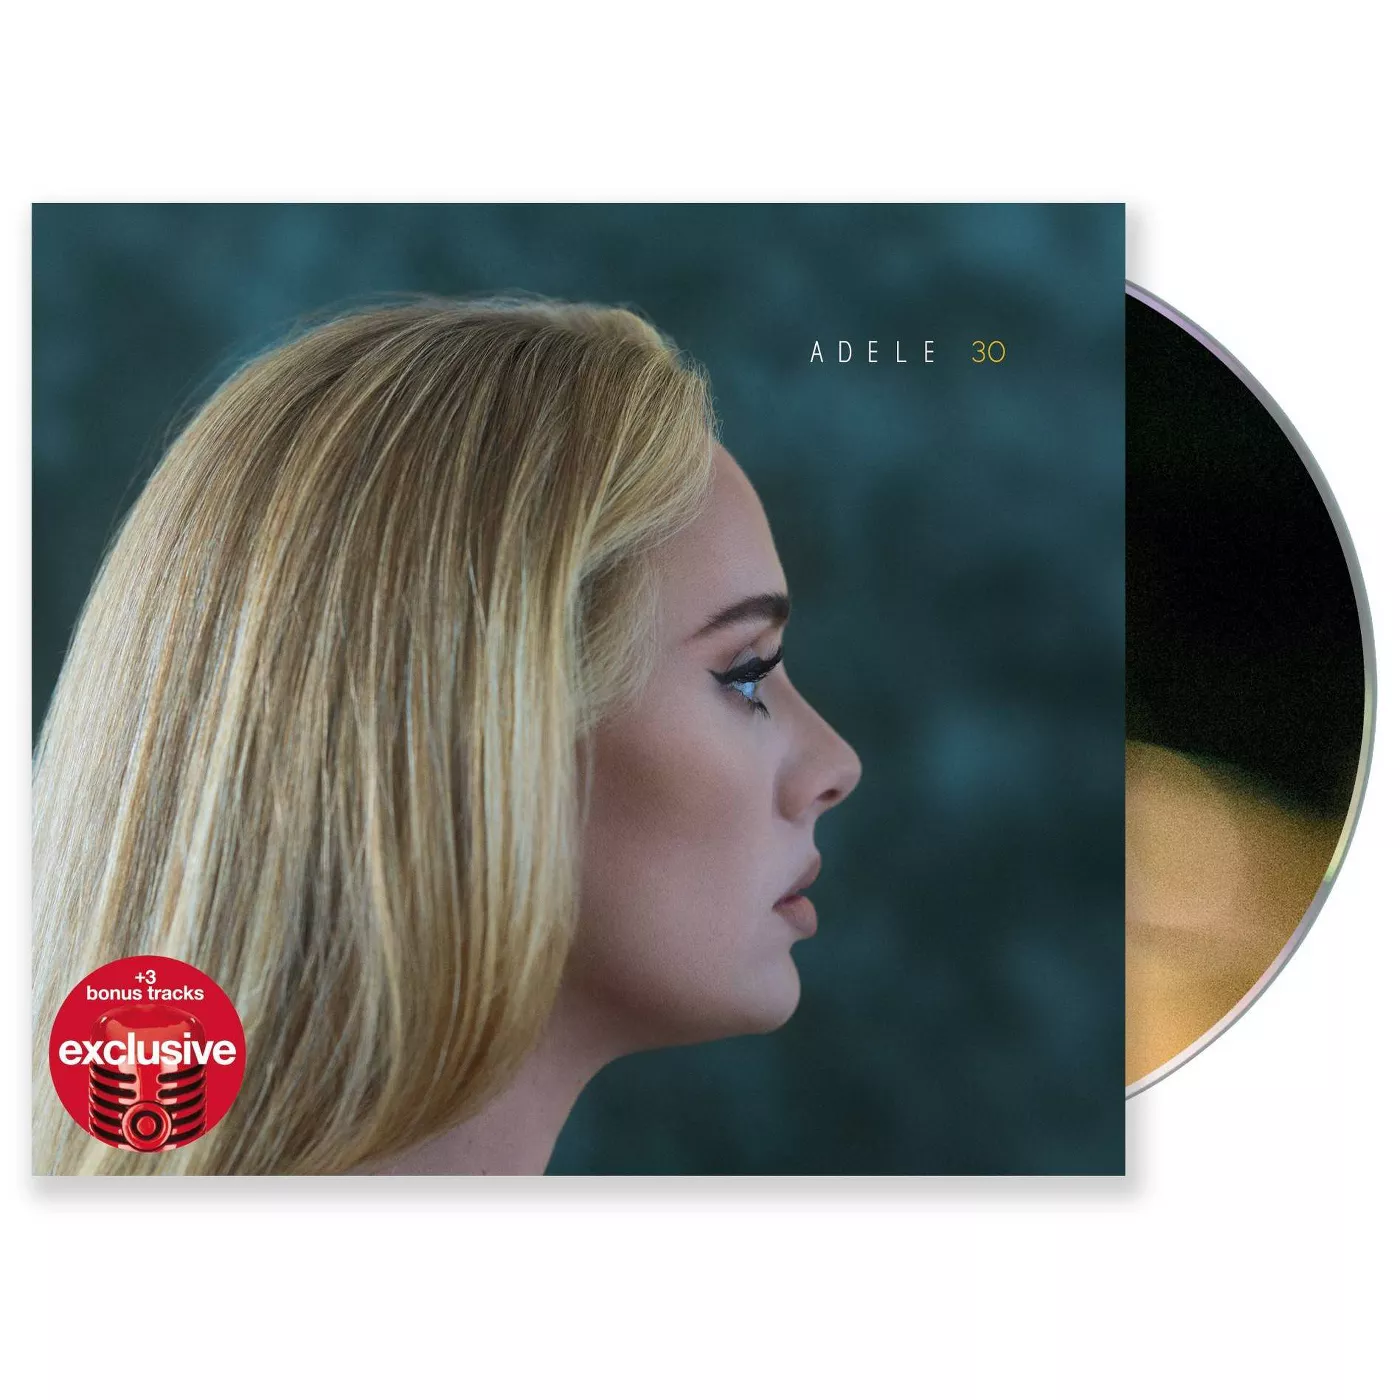 Adele - 30 (Target Exclusive, Deluxe CD) - image 3 of 4